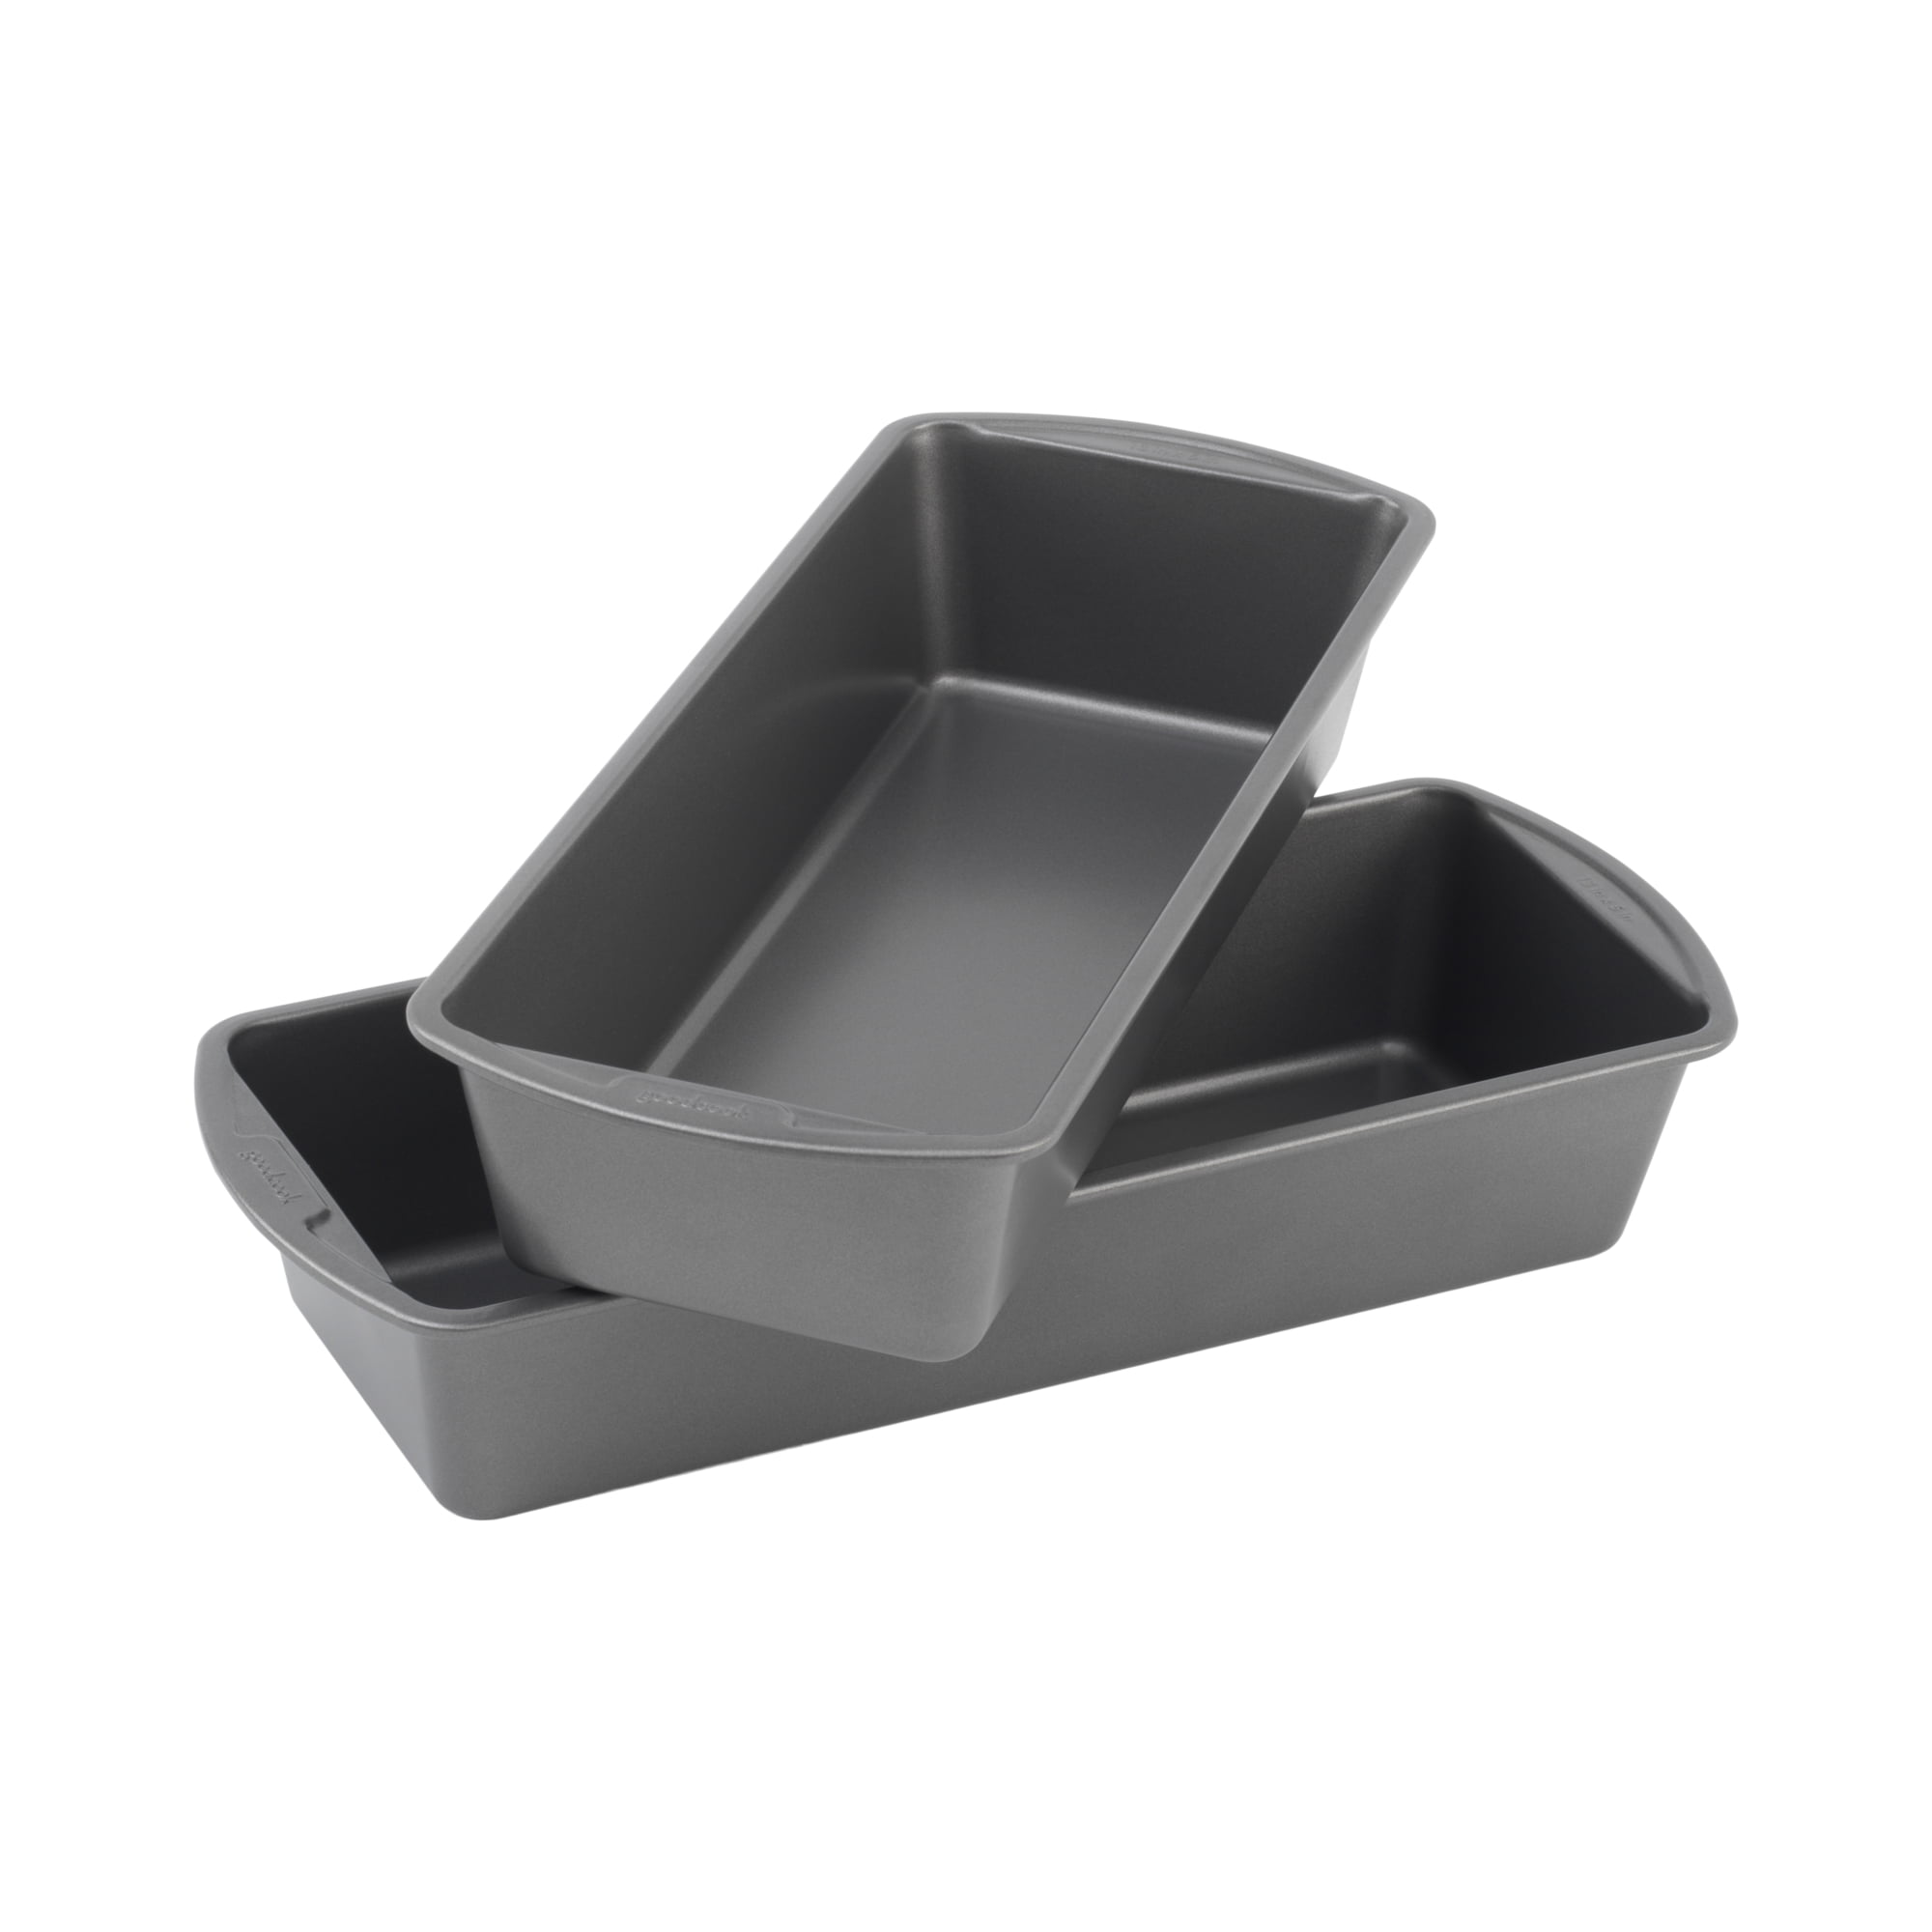 G & S Metal 9.3 X 5.2 Oven Stuff Large Loaf Pan , Gray